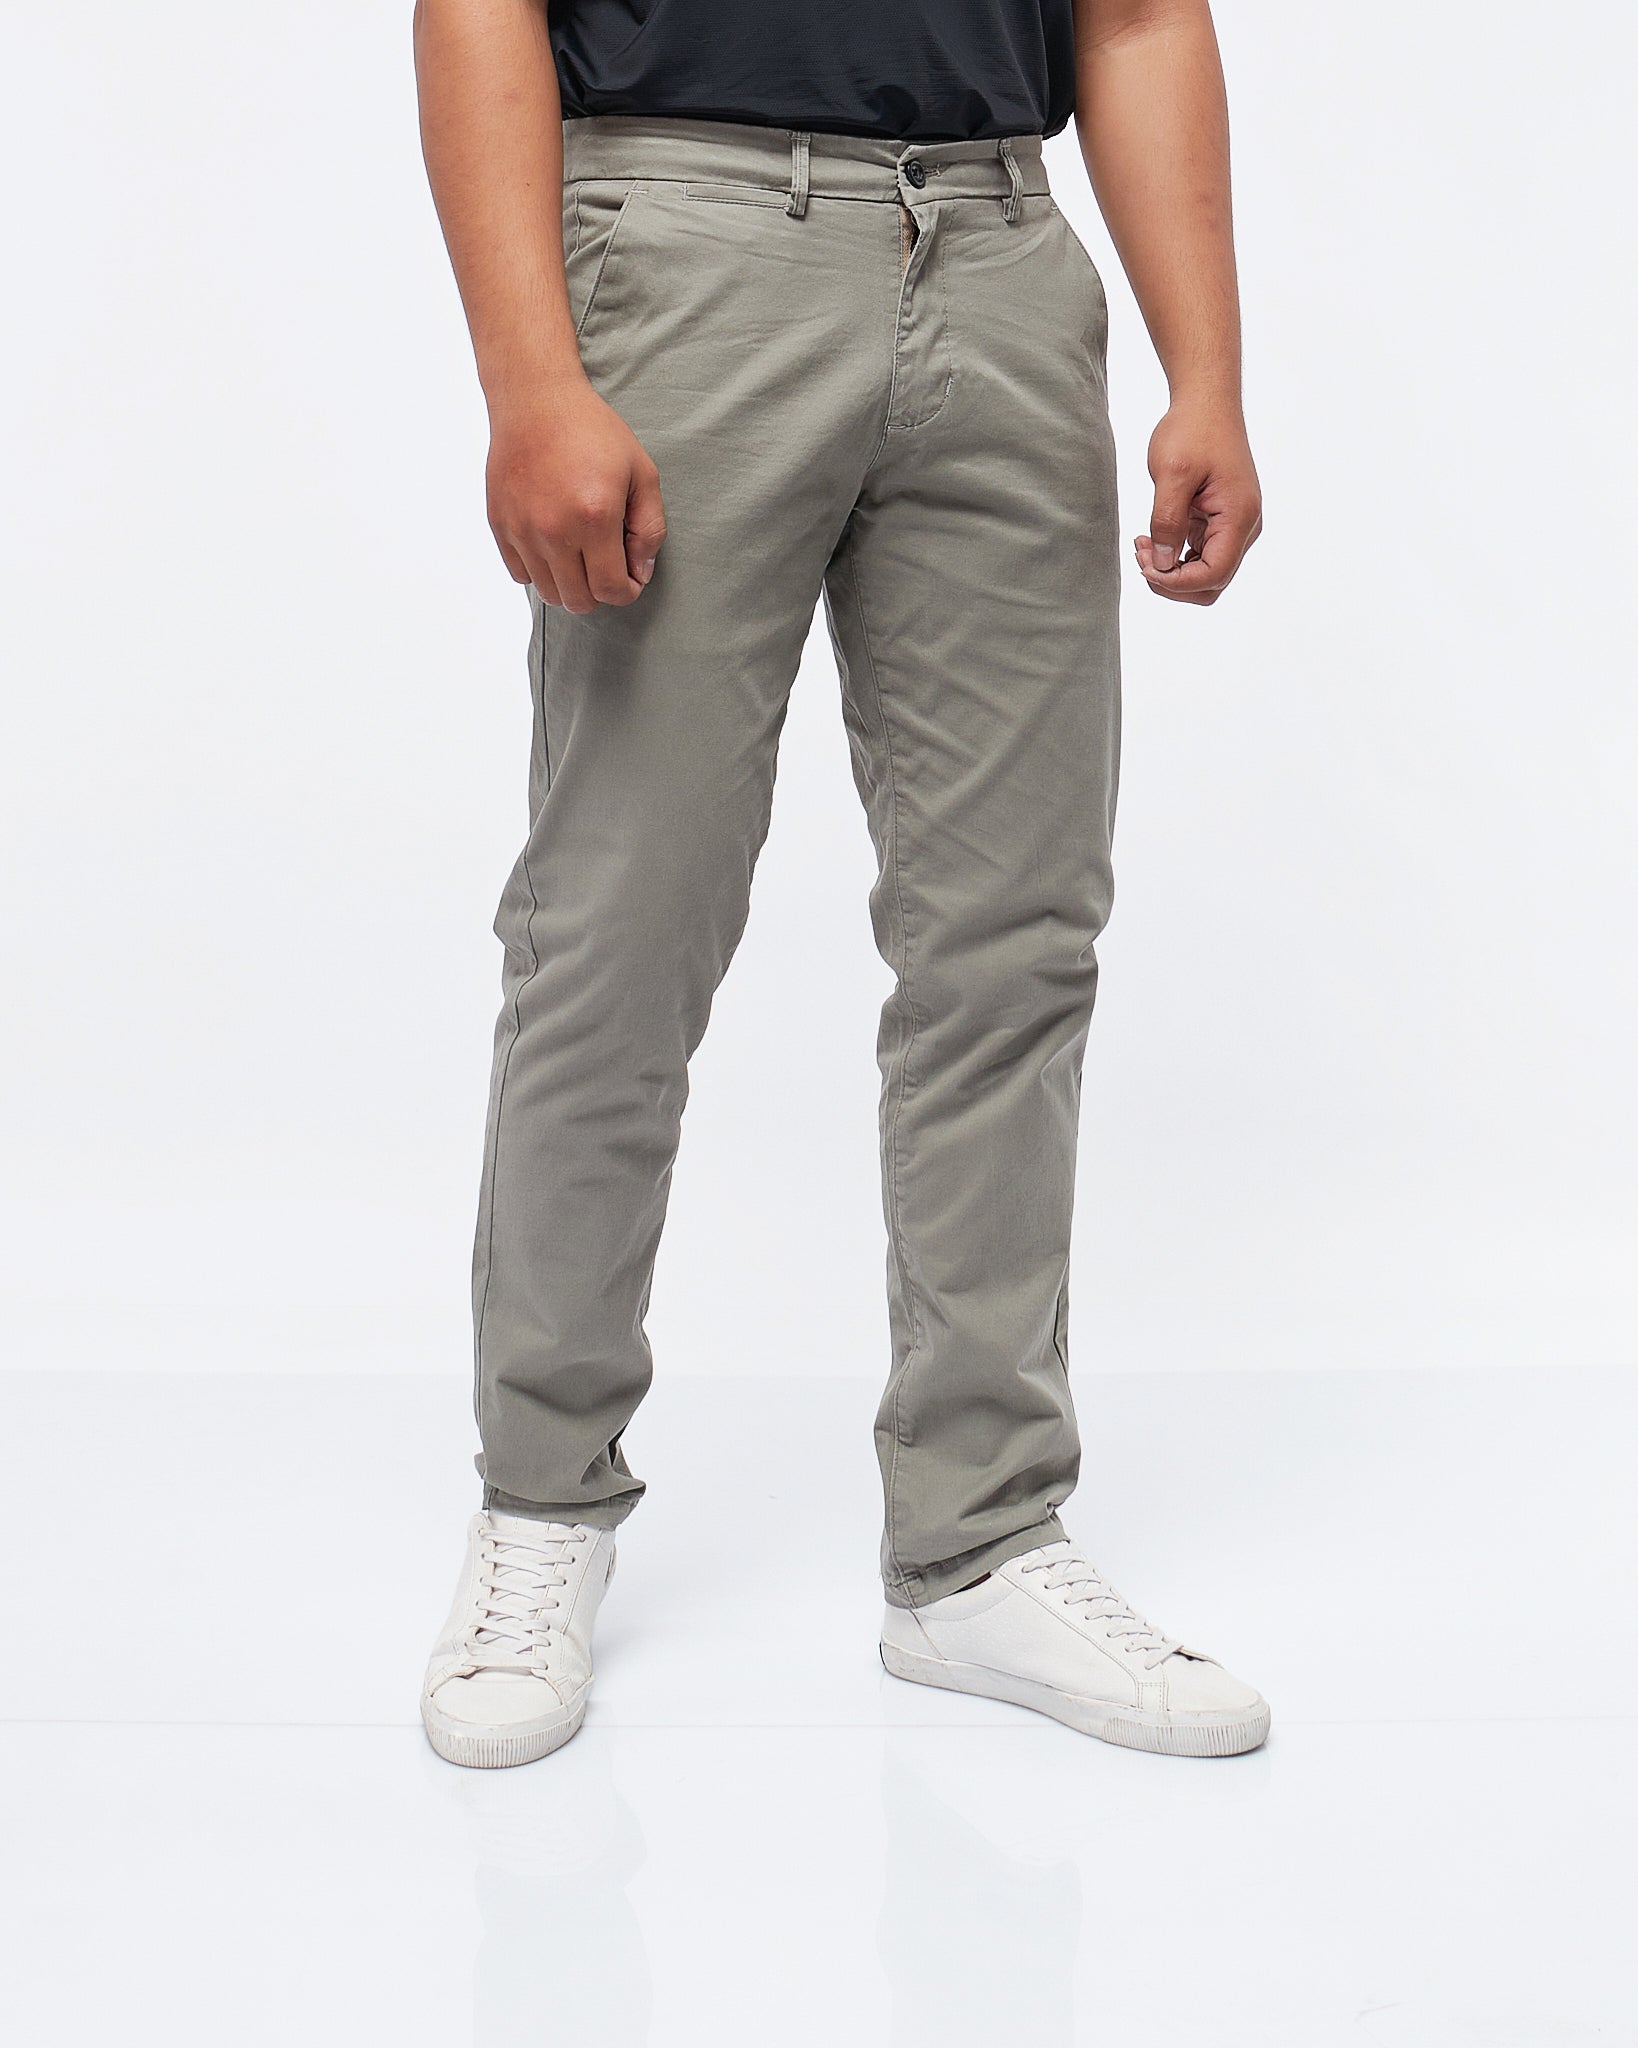 Straight Ultimate Tech Built-In Flex Chino Pants | Old Navy | Chinos pants,  Mens outfits, Bottom clothes